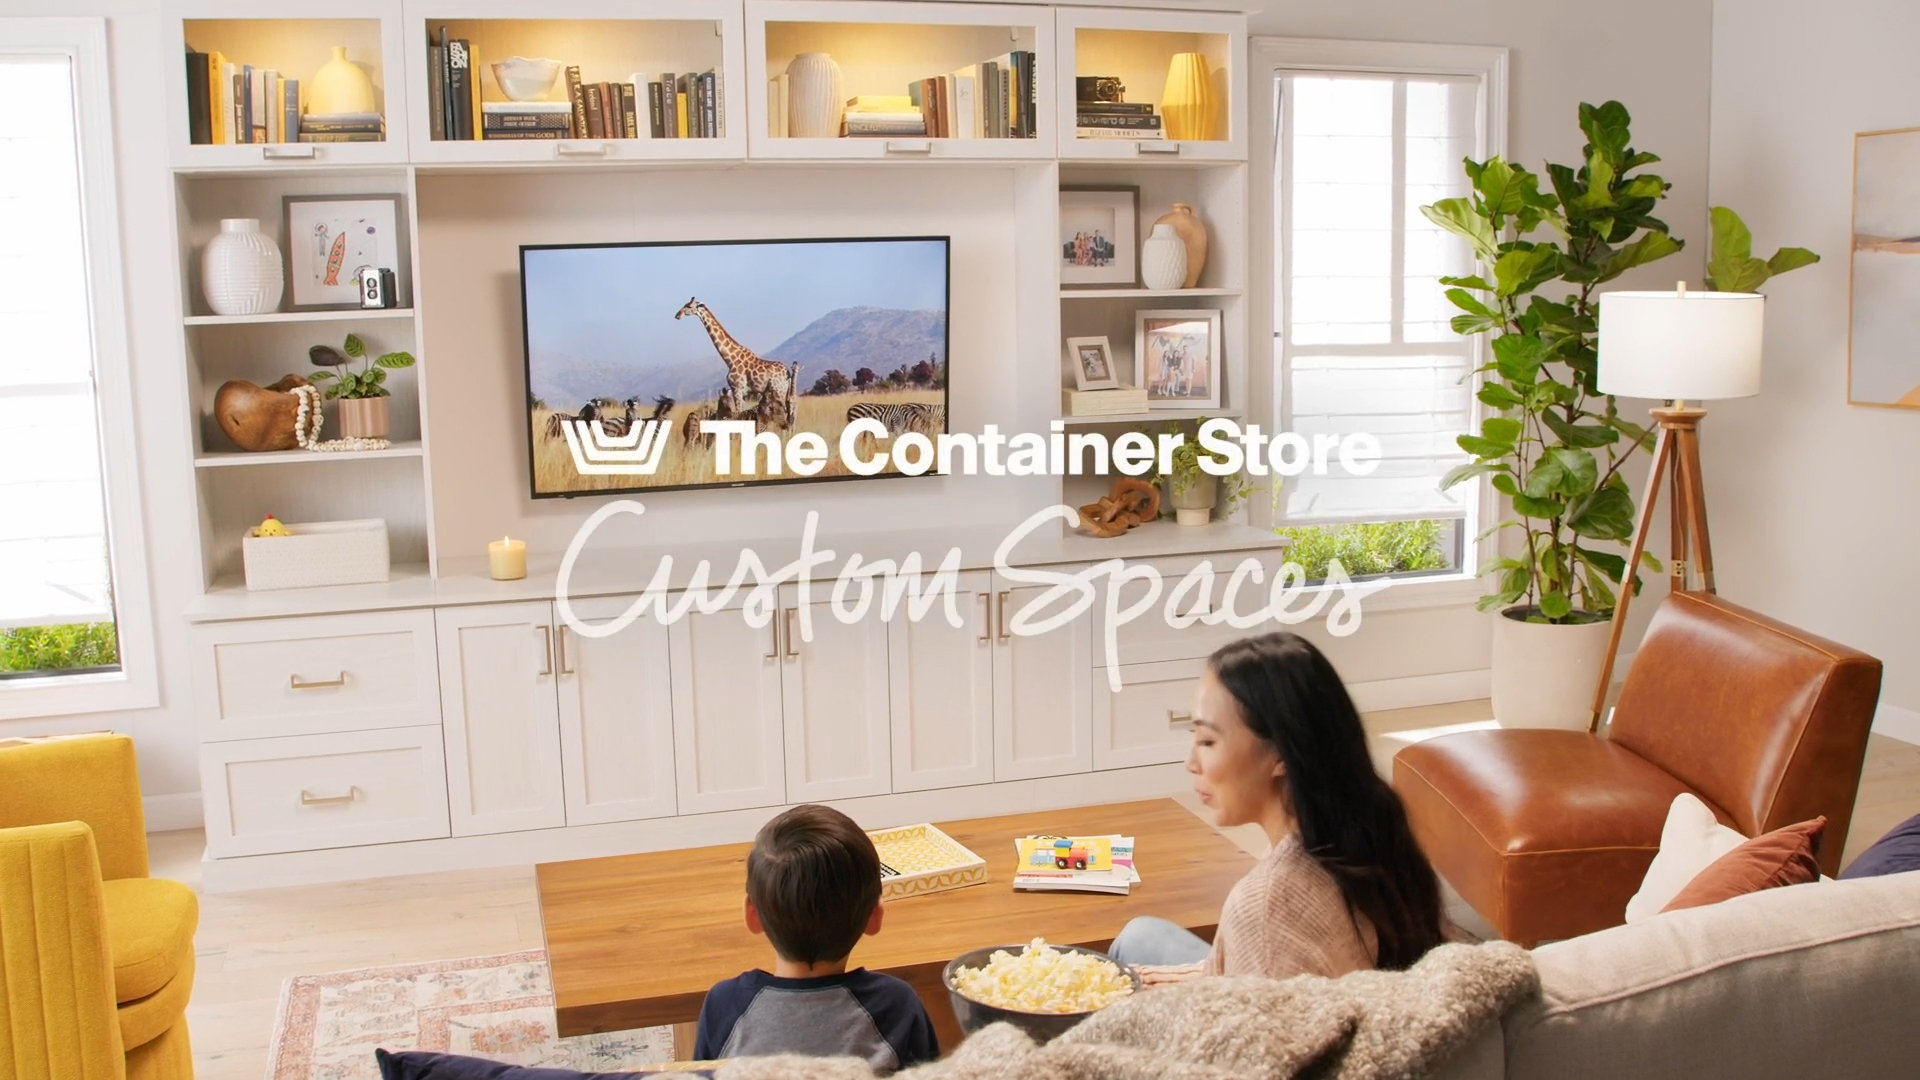 Introducing The Container Store Custom Spaces